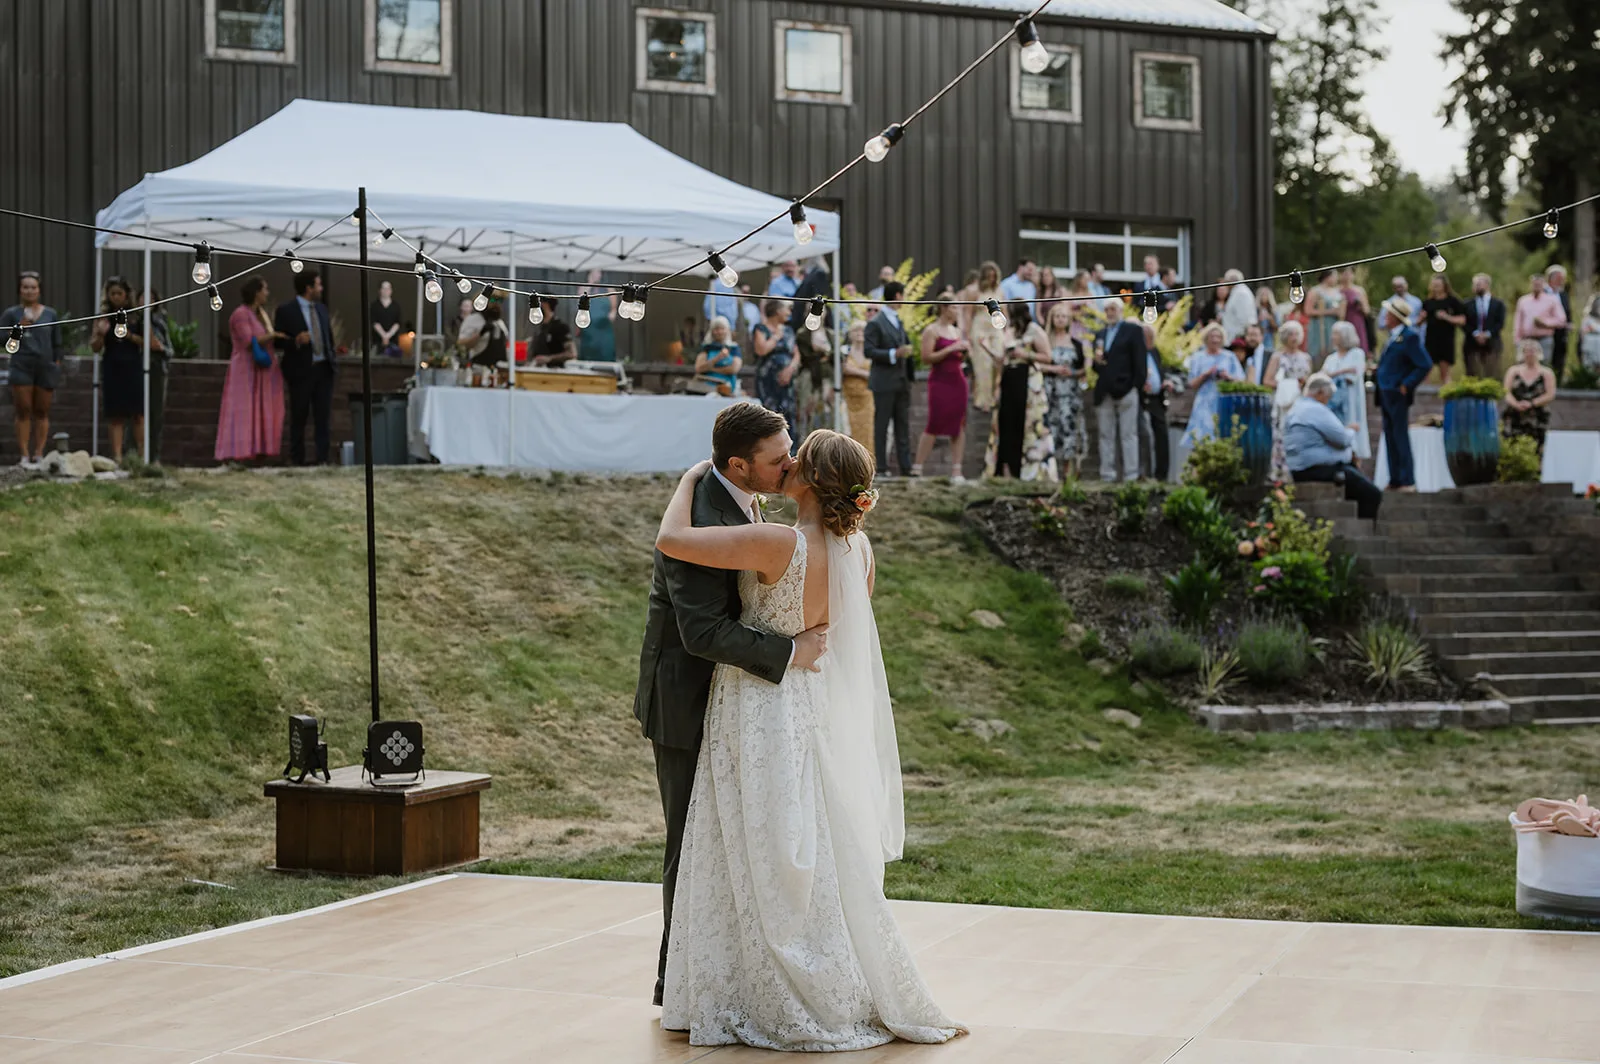 A bride and groom share their first dance under string lights at an outdoor wedding, with the bride wearing a lace gown and the groom in a dark suit, surrounded by guests who are watching and celebrating in the background.